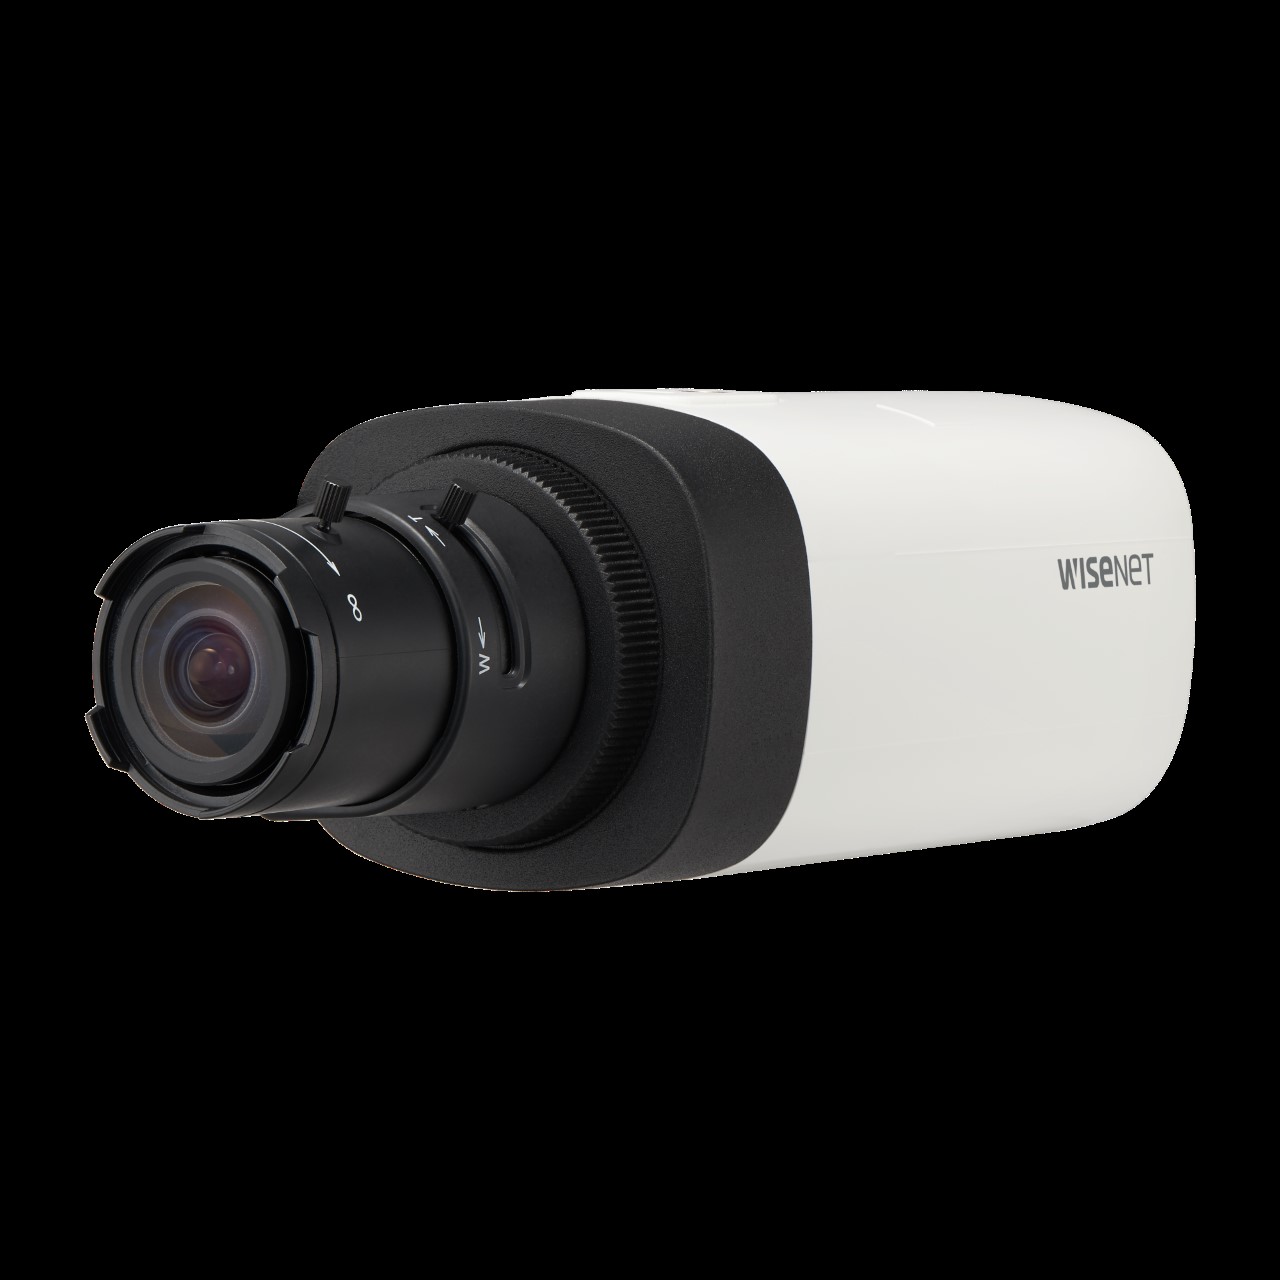 Hanwha introduces the new 2 megapixel Wisenet QNB-6002 and the 5 megapixel Wisenet QNB-8002.